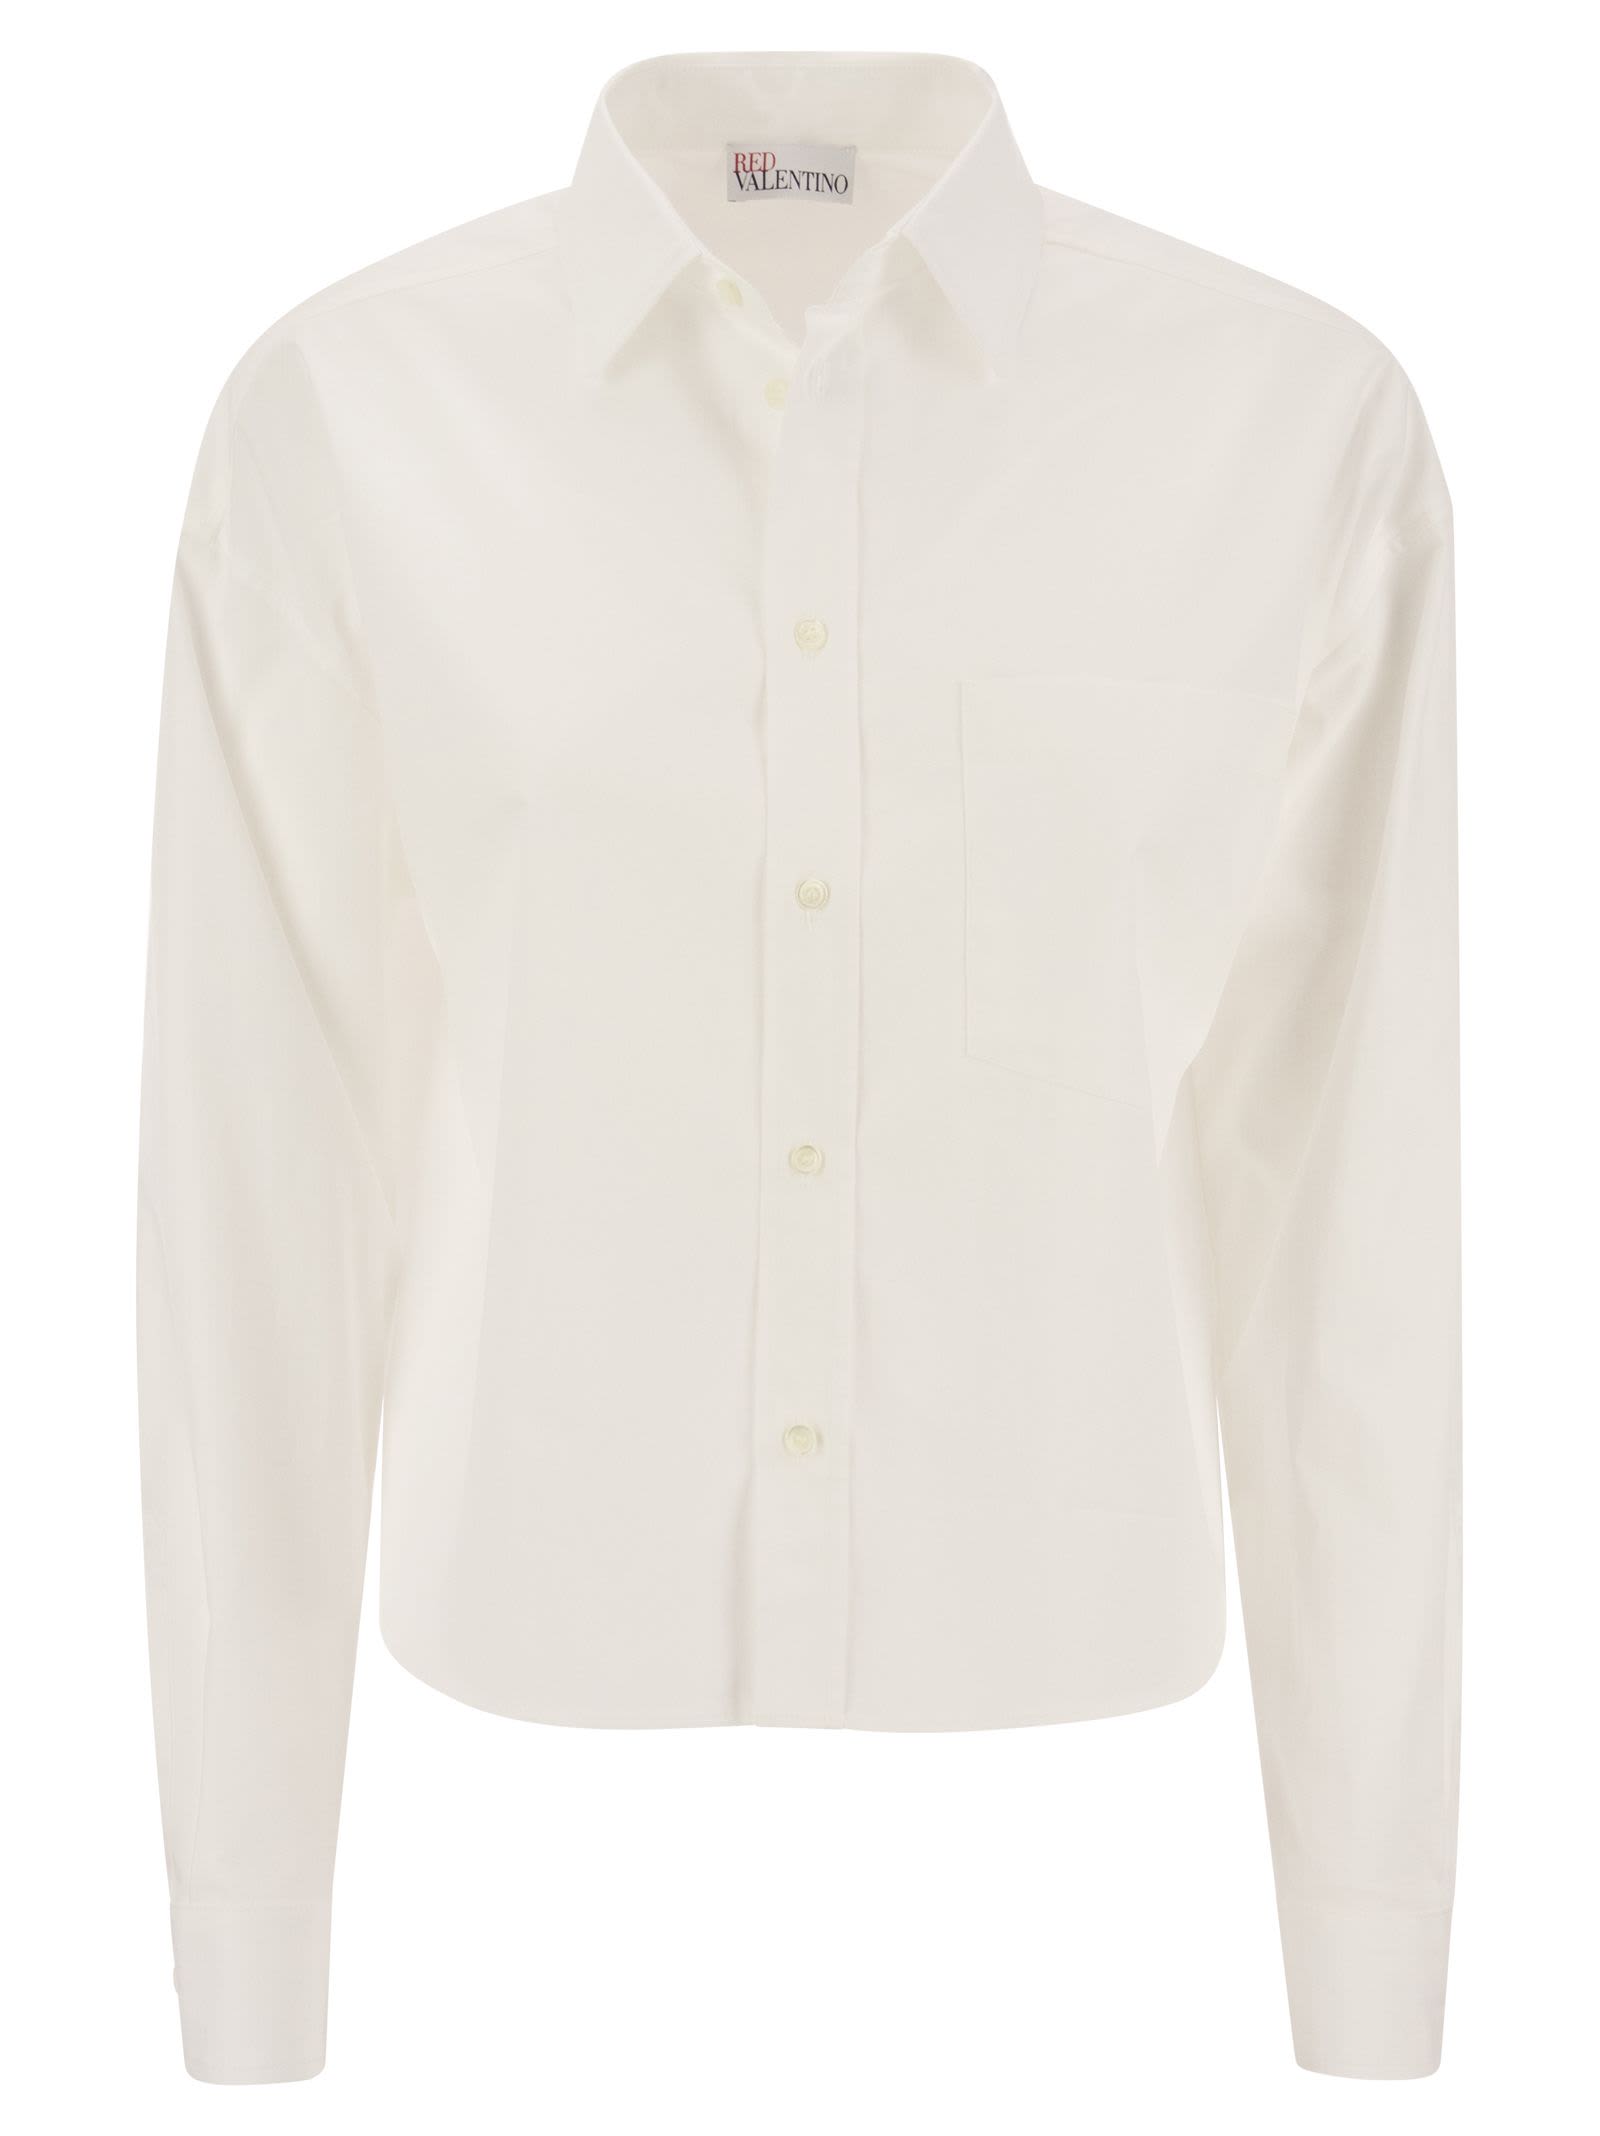 RED VALENTINO CROPPED SHIRT IN COTTON POPLIN